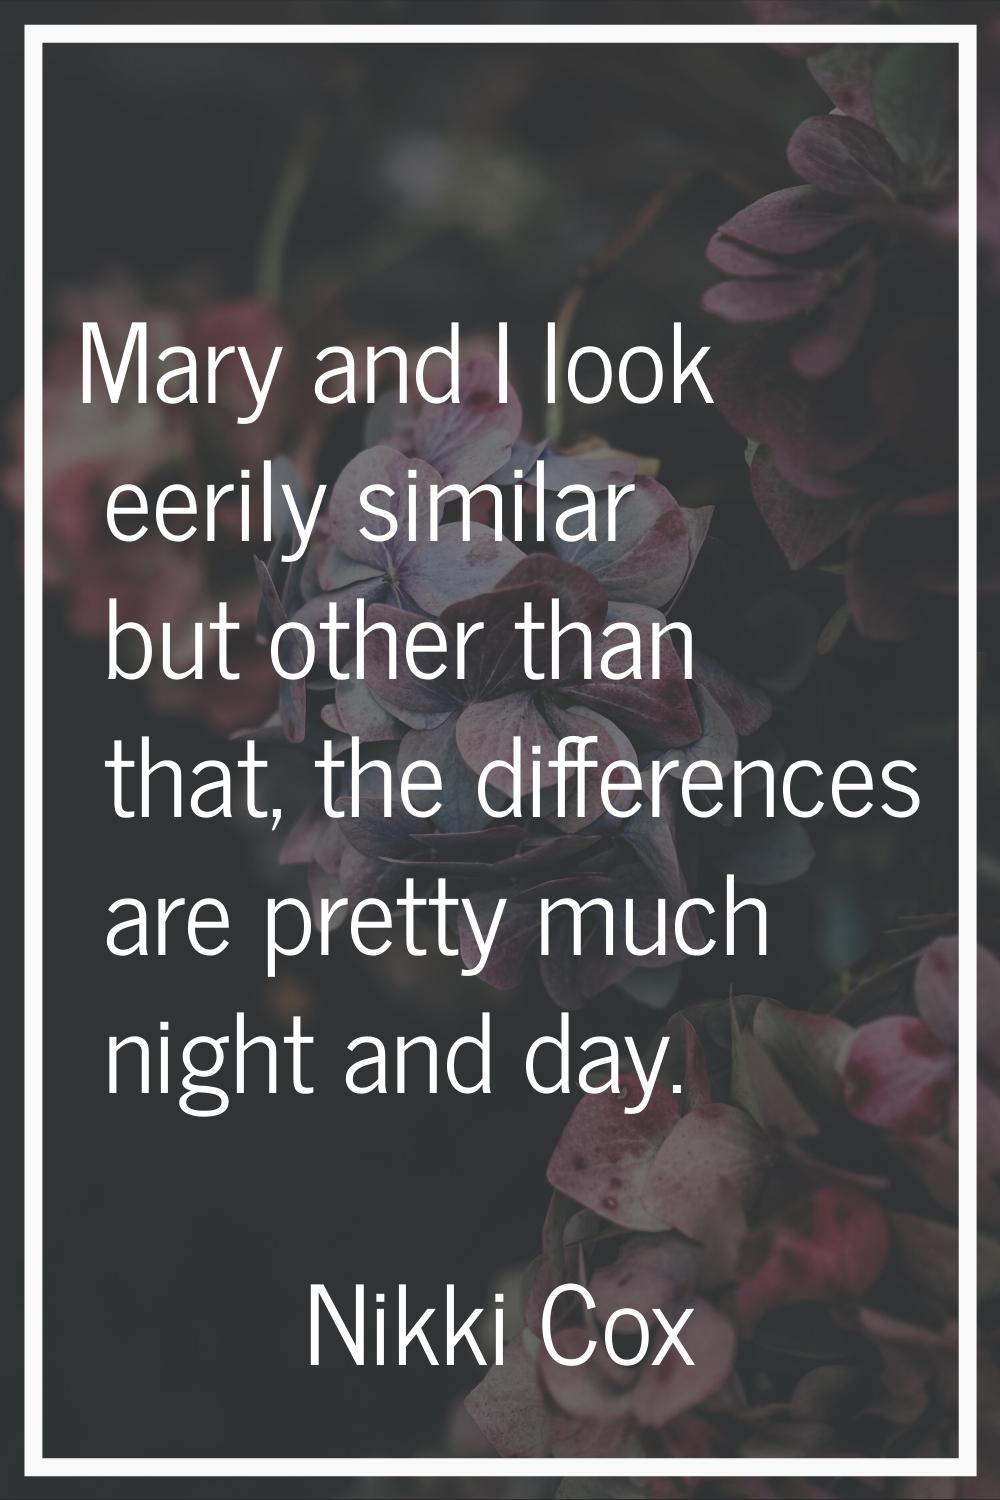 Mary and I look eerily similar but other than that, the differences are pretty much night and day.